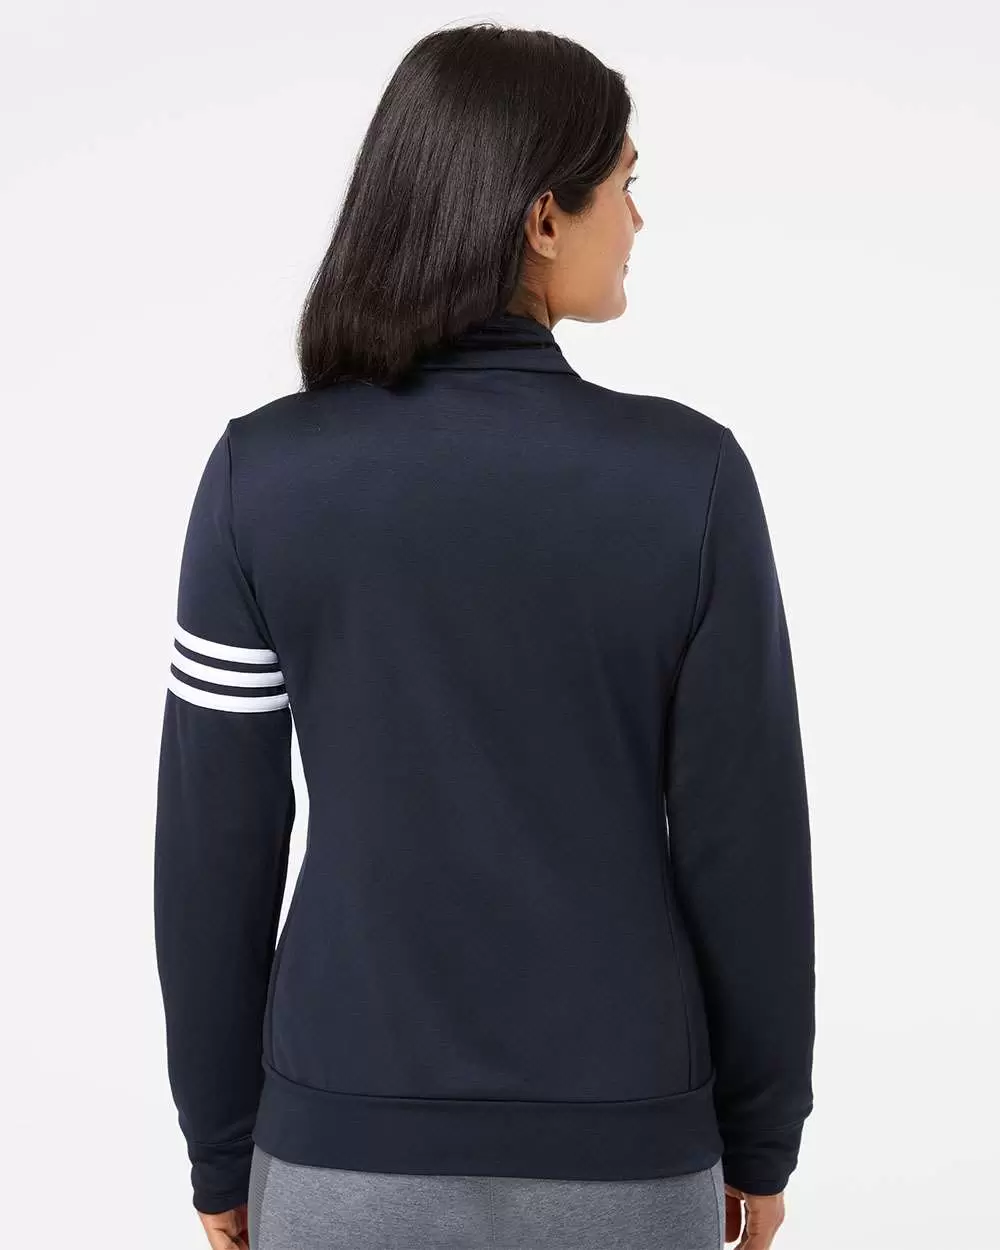 A191 adidas - Ladies' ClimaLite® 3-Stripes French Terry Full-Zip